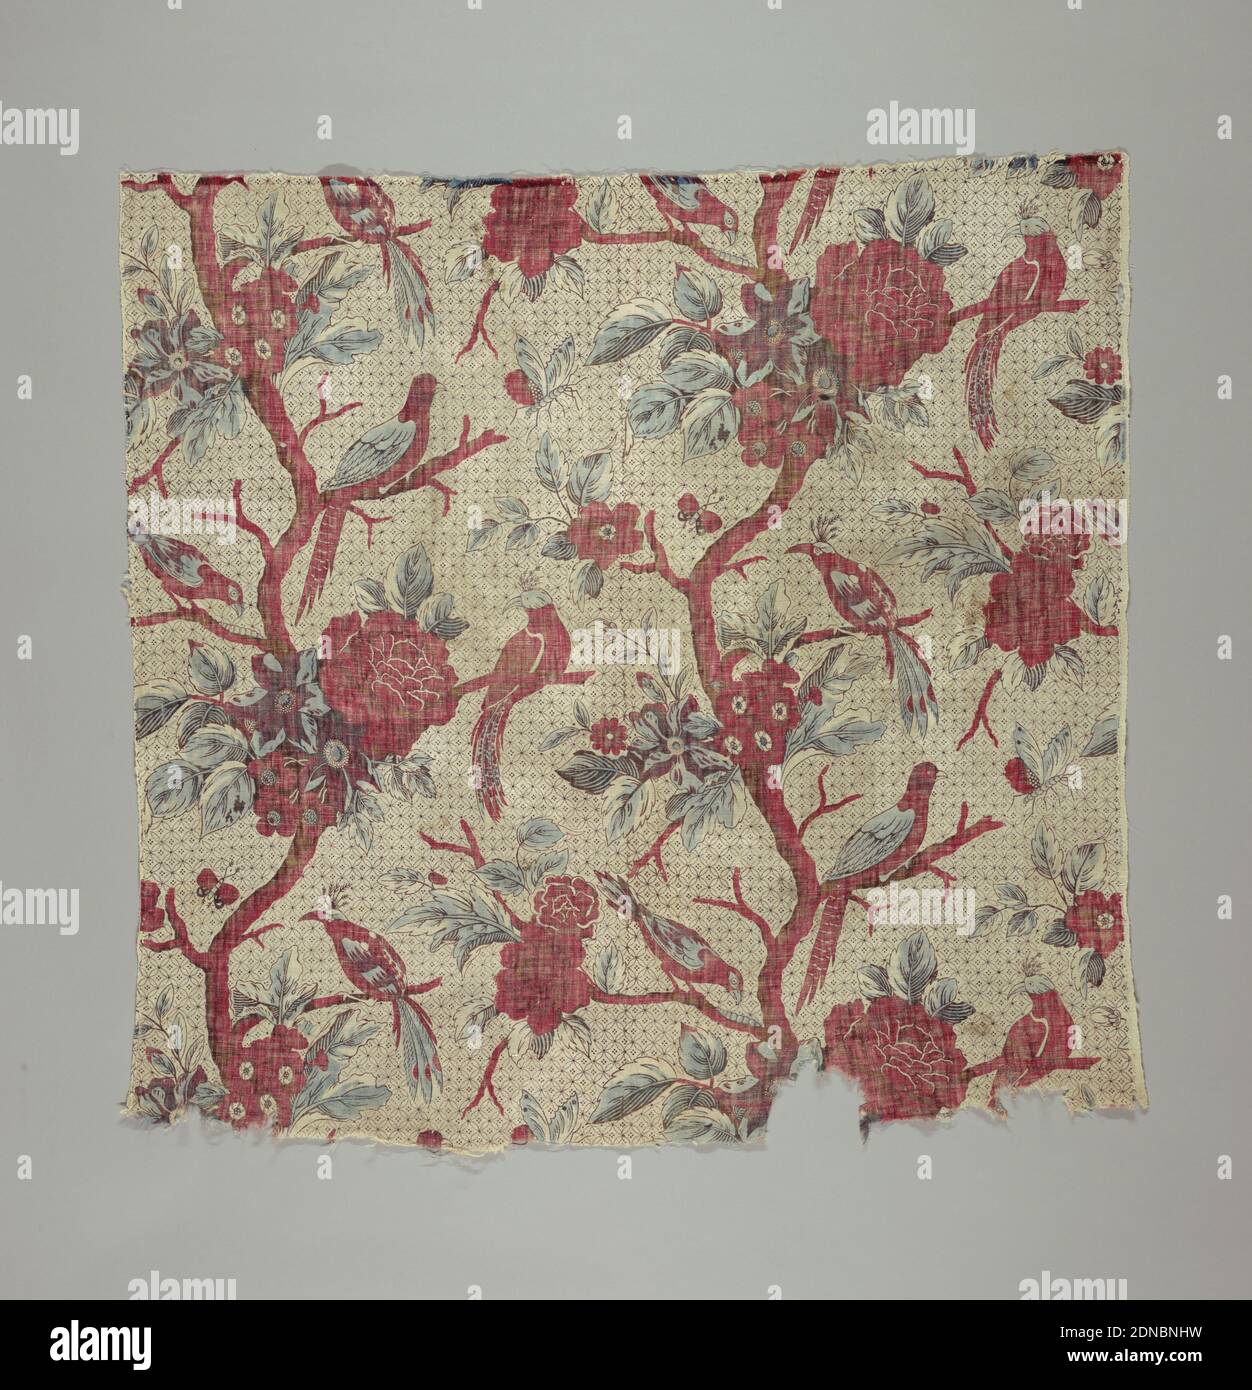 Textile, Medium: cotton Technique: block printed on plain weave, Printed cotton with flowering trees with birds perched on branches on a small scale background pattern of overlapped circles., France, 1780–89, printed, dyed & painted textiles, Textile Stock Photo